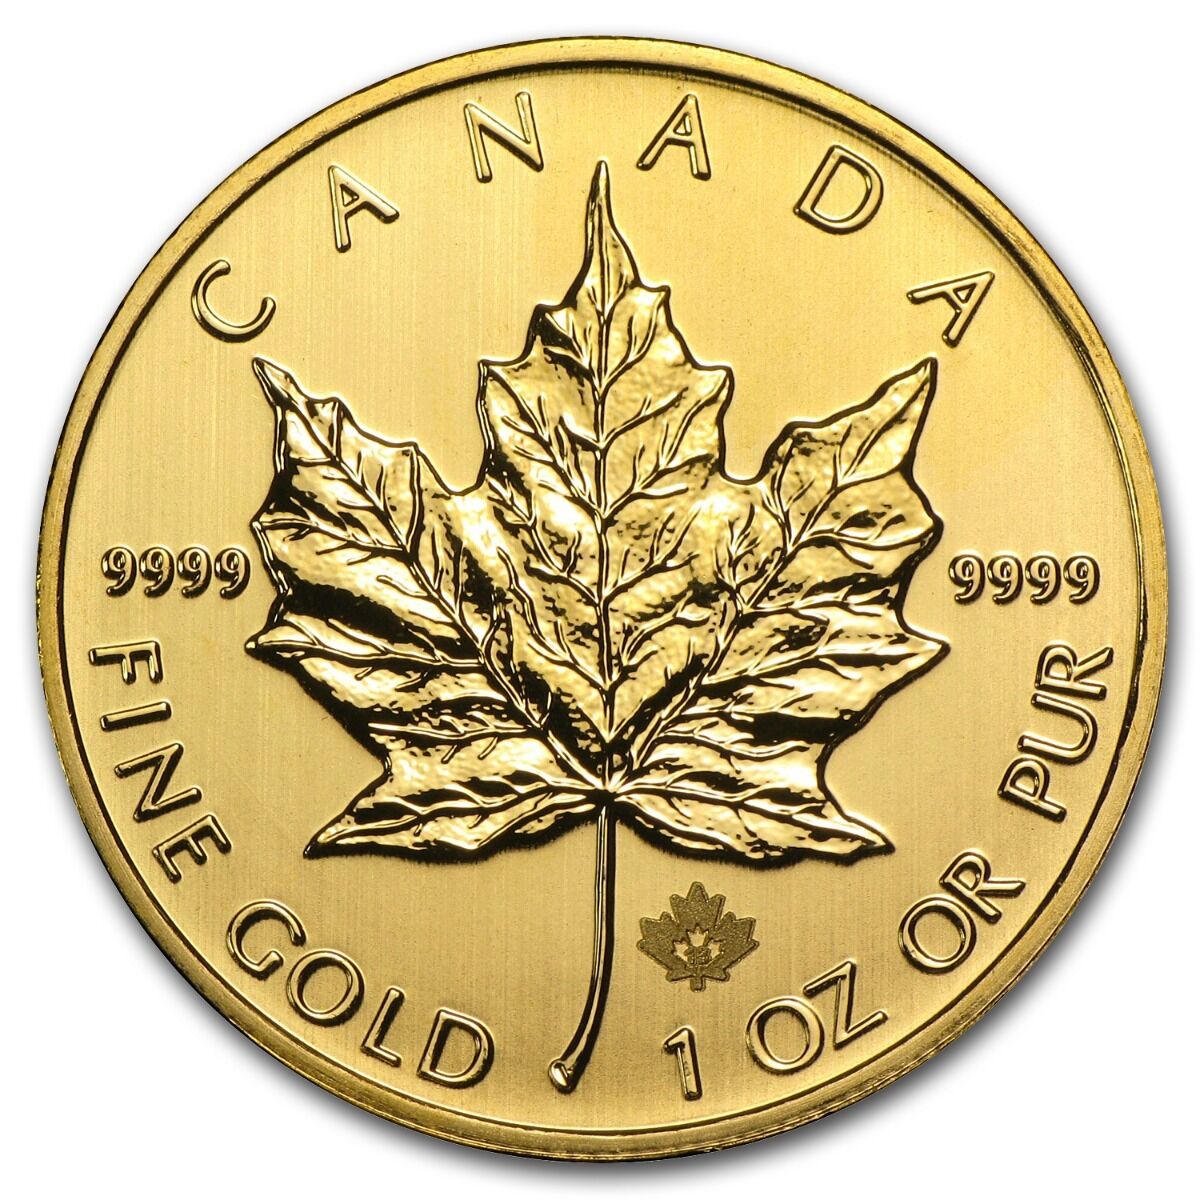 2013 1 oz Gold Canadian Maple Leaf Coin